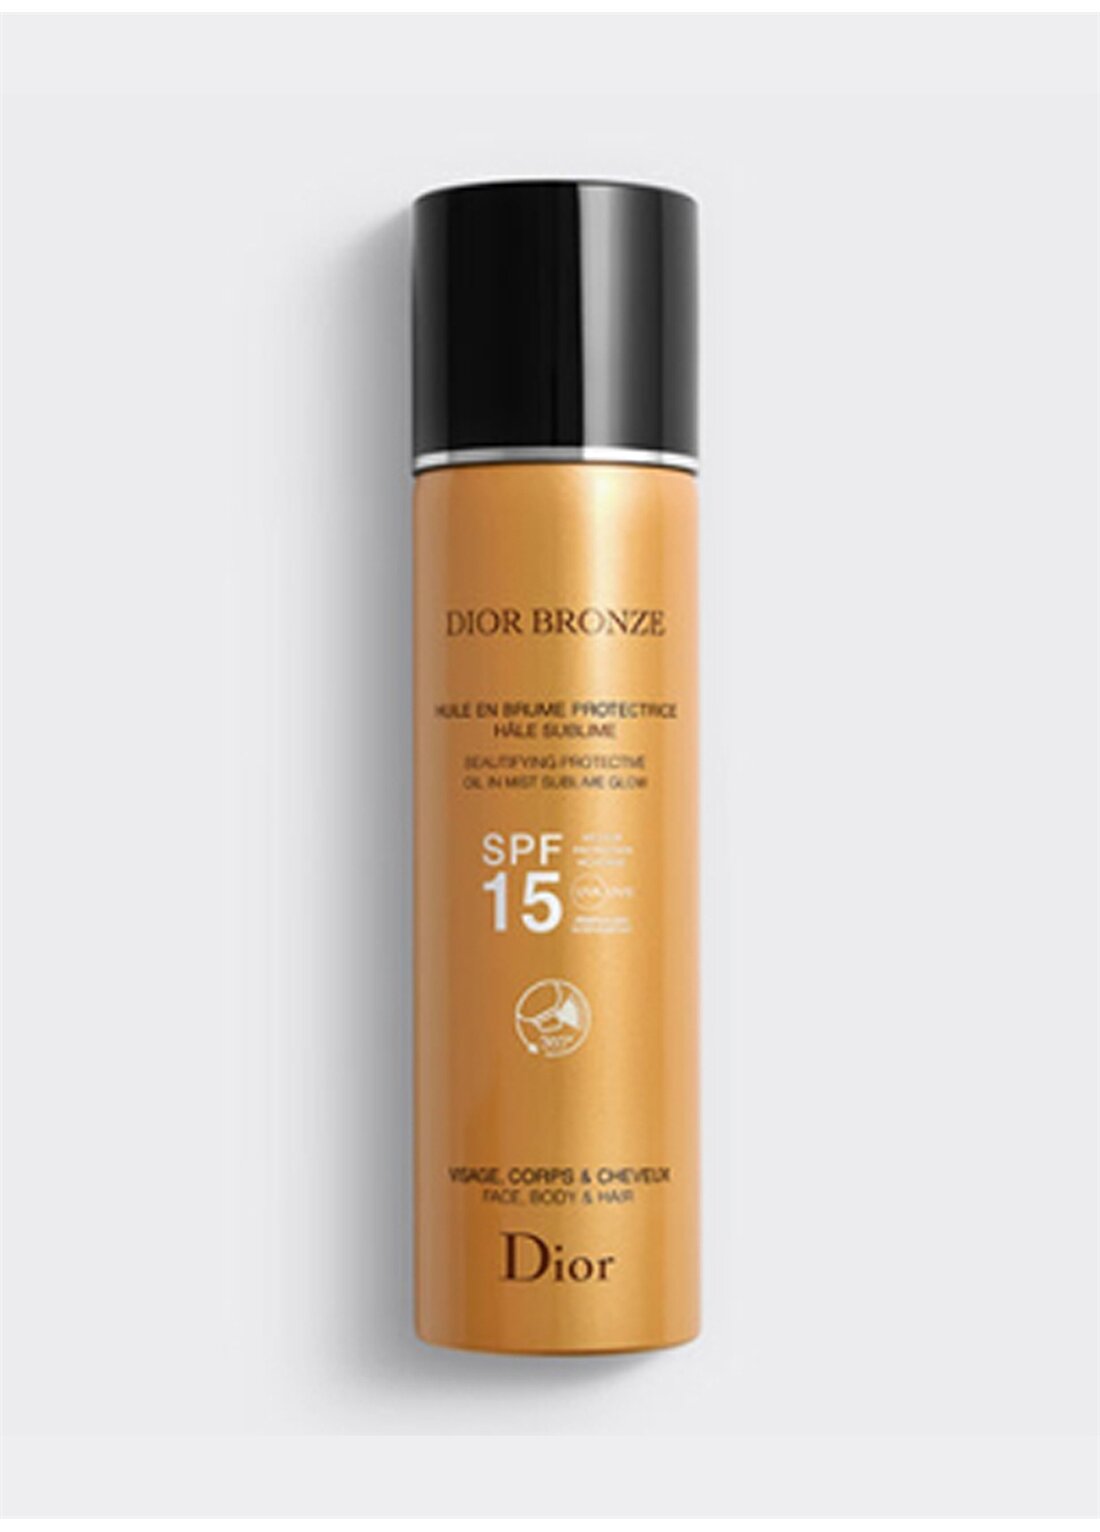 Dior Bronze Beautifying Protective Oil In Mist Sublime Glow Spf15 125 Ml